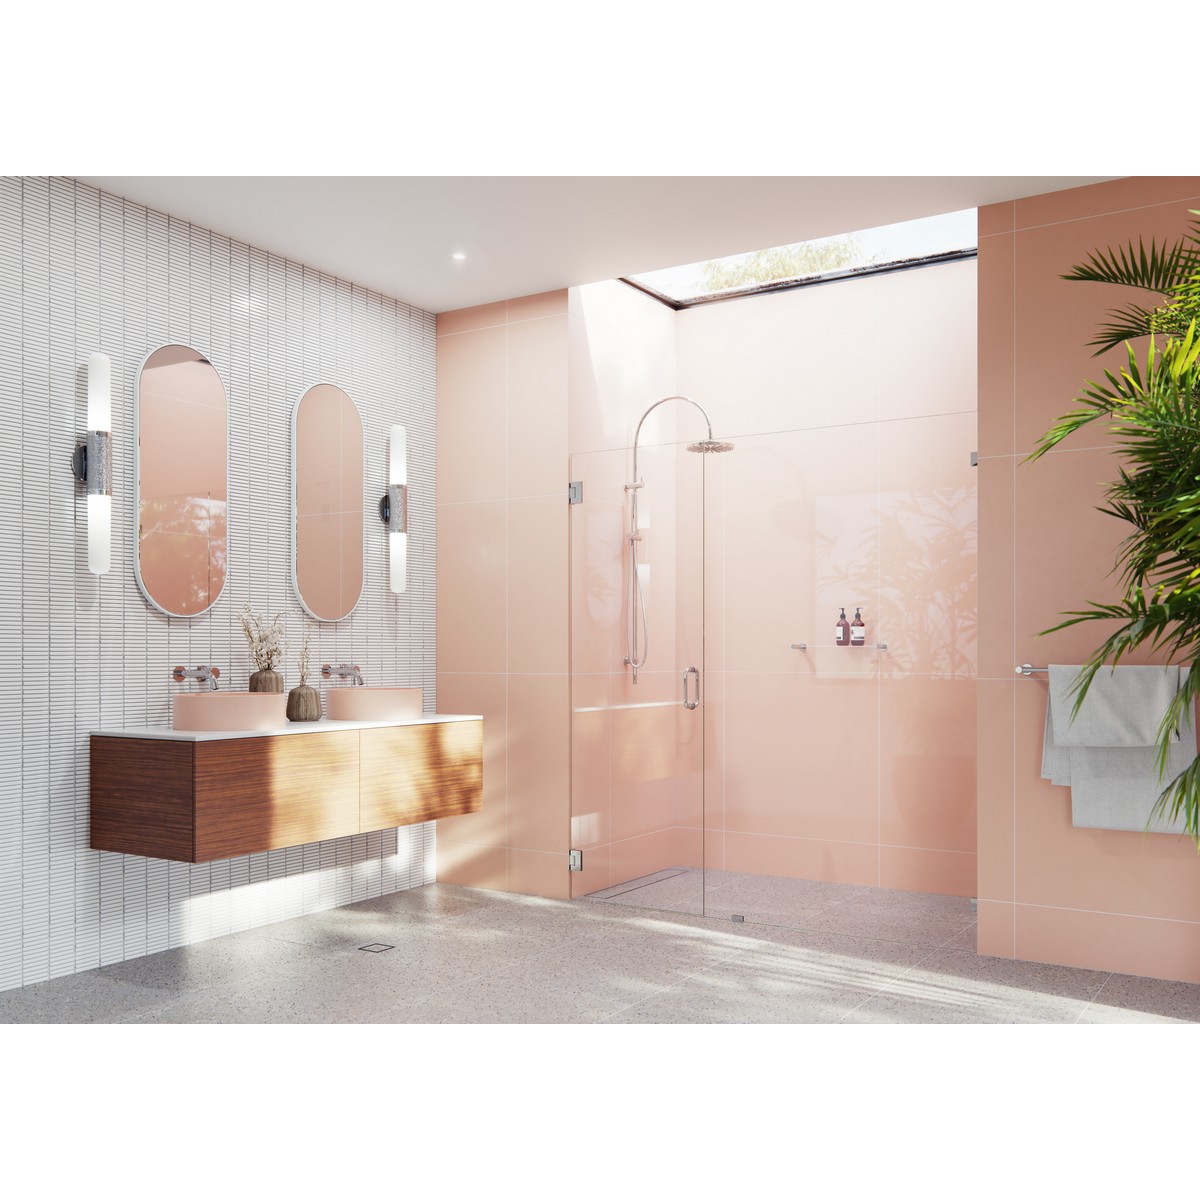 GLASS WAREHOUSE GW-WH-74 ILLUME 74 W X 78 H WALL HINGED FULLY FRAMELESS GLASS SHOWER ENCLOSURE